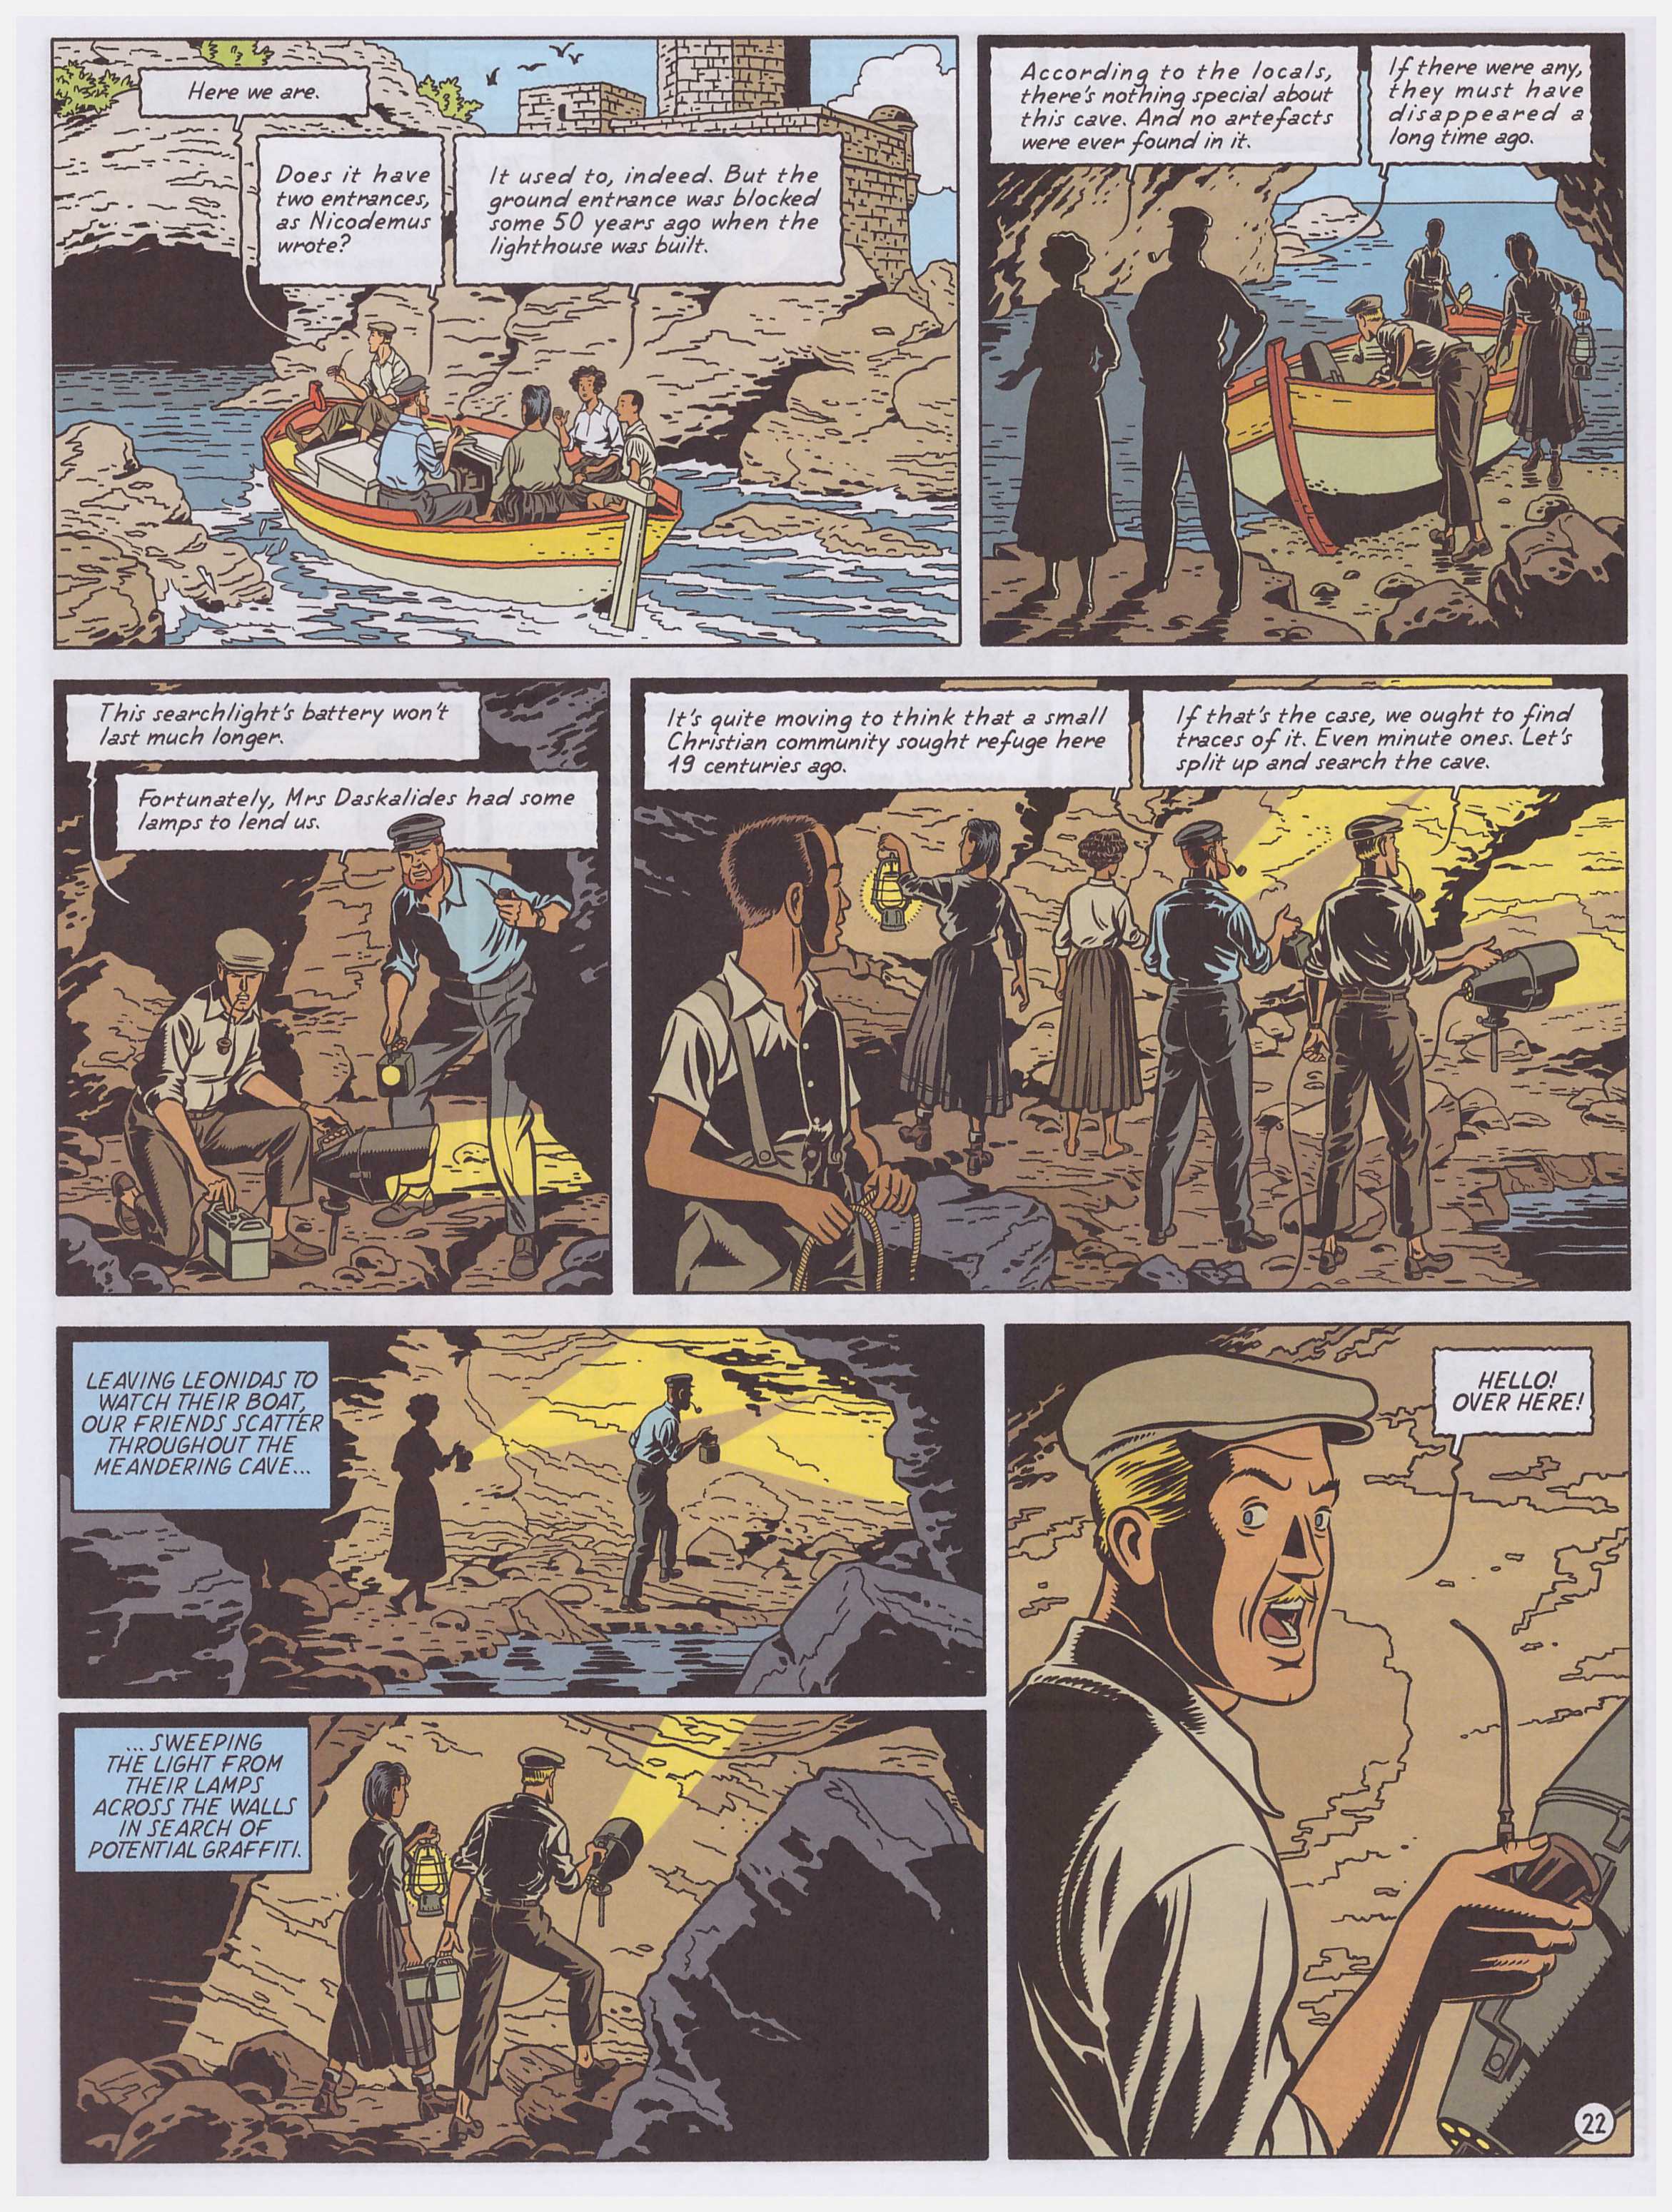 Blake and Mortimer: The Curse of the 30 Pieces of Silver part 2 review